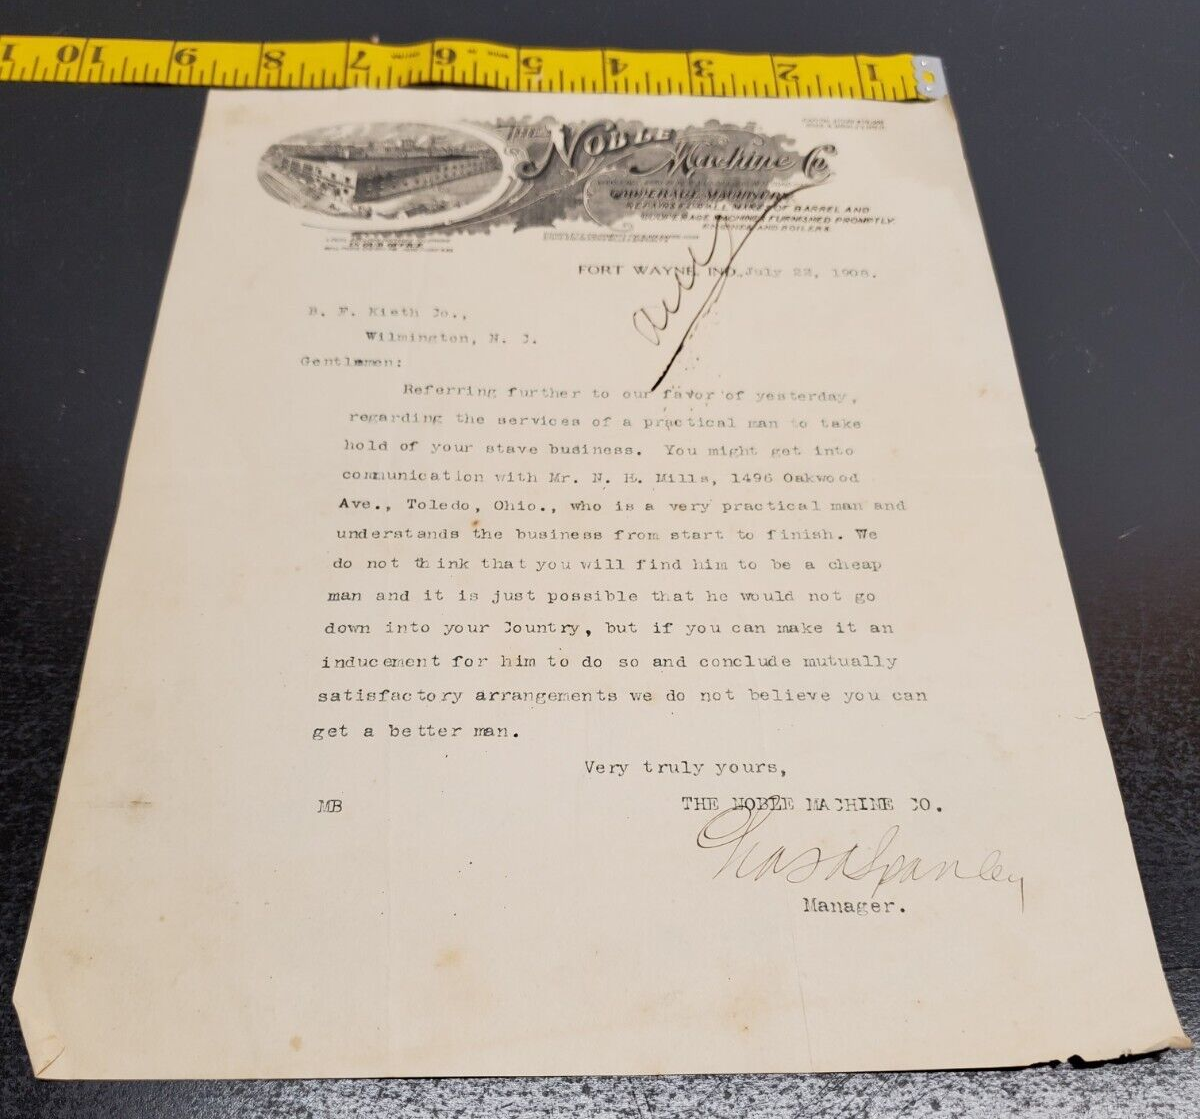 1908 The Noble Machine Co. Cooperage Machinery Letter - Fort W...